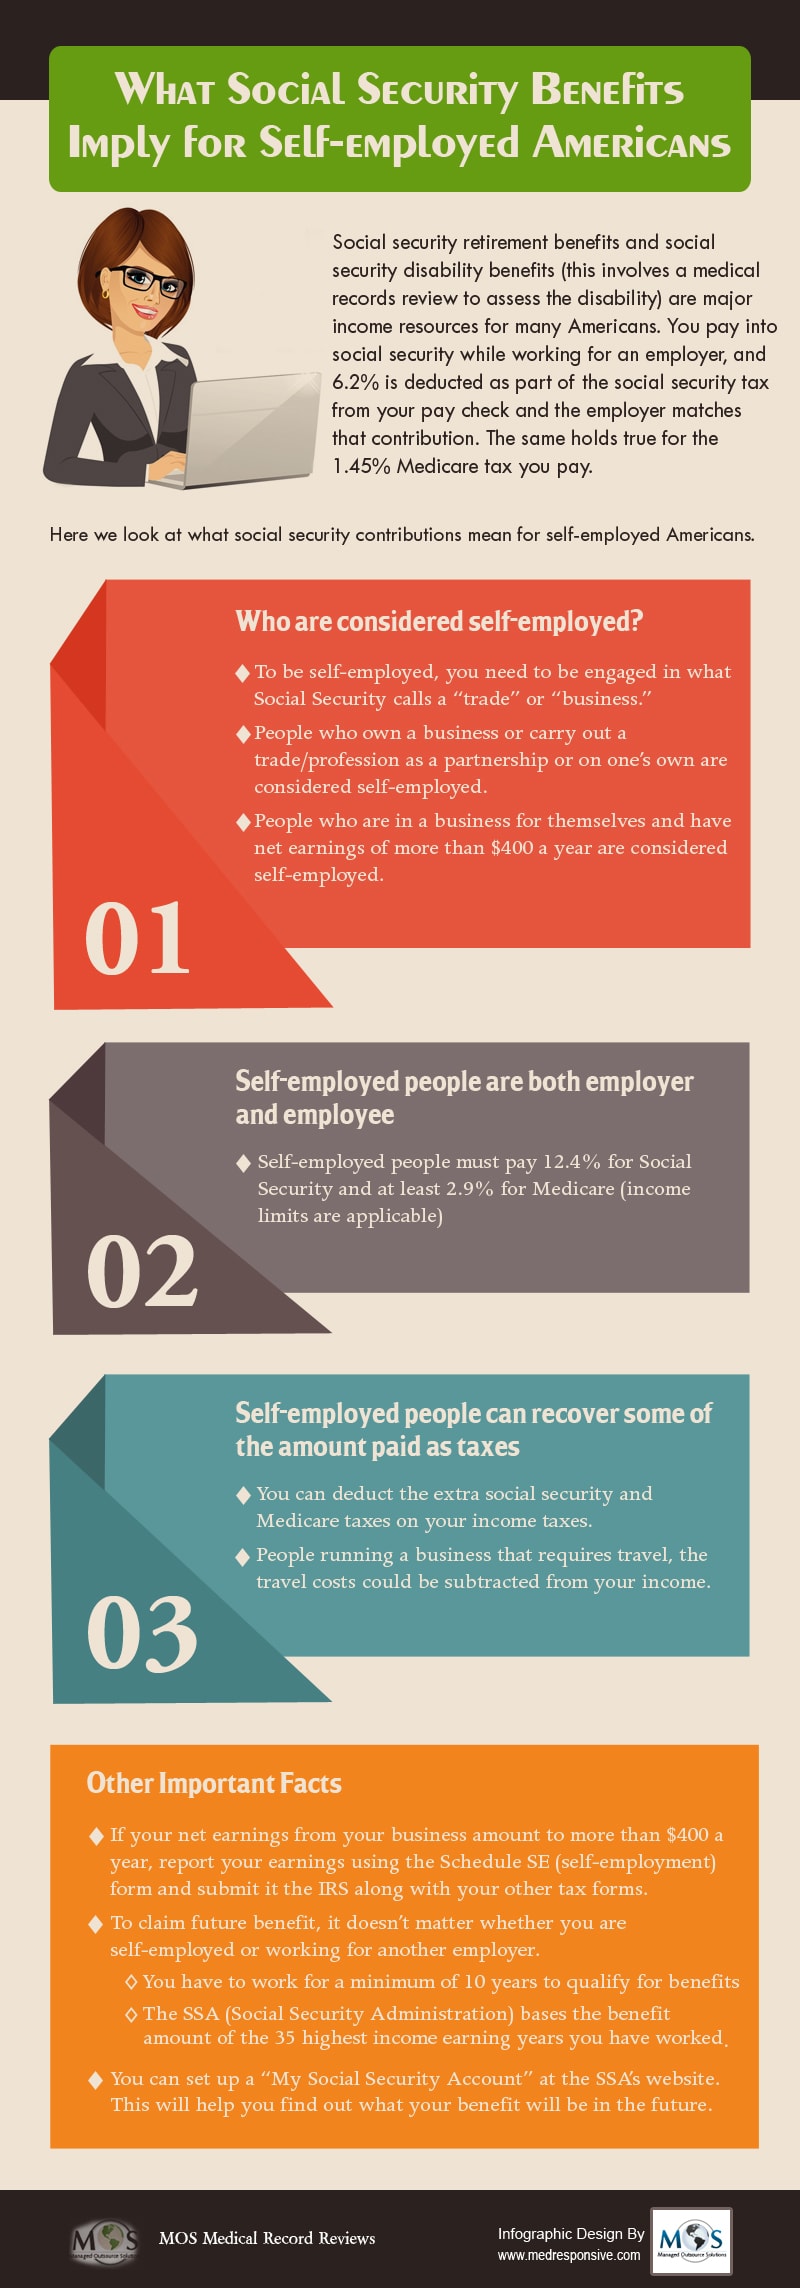 Self Employed Americans & Social Security Benefits